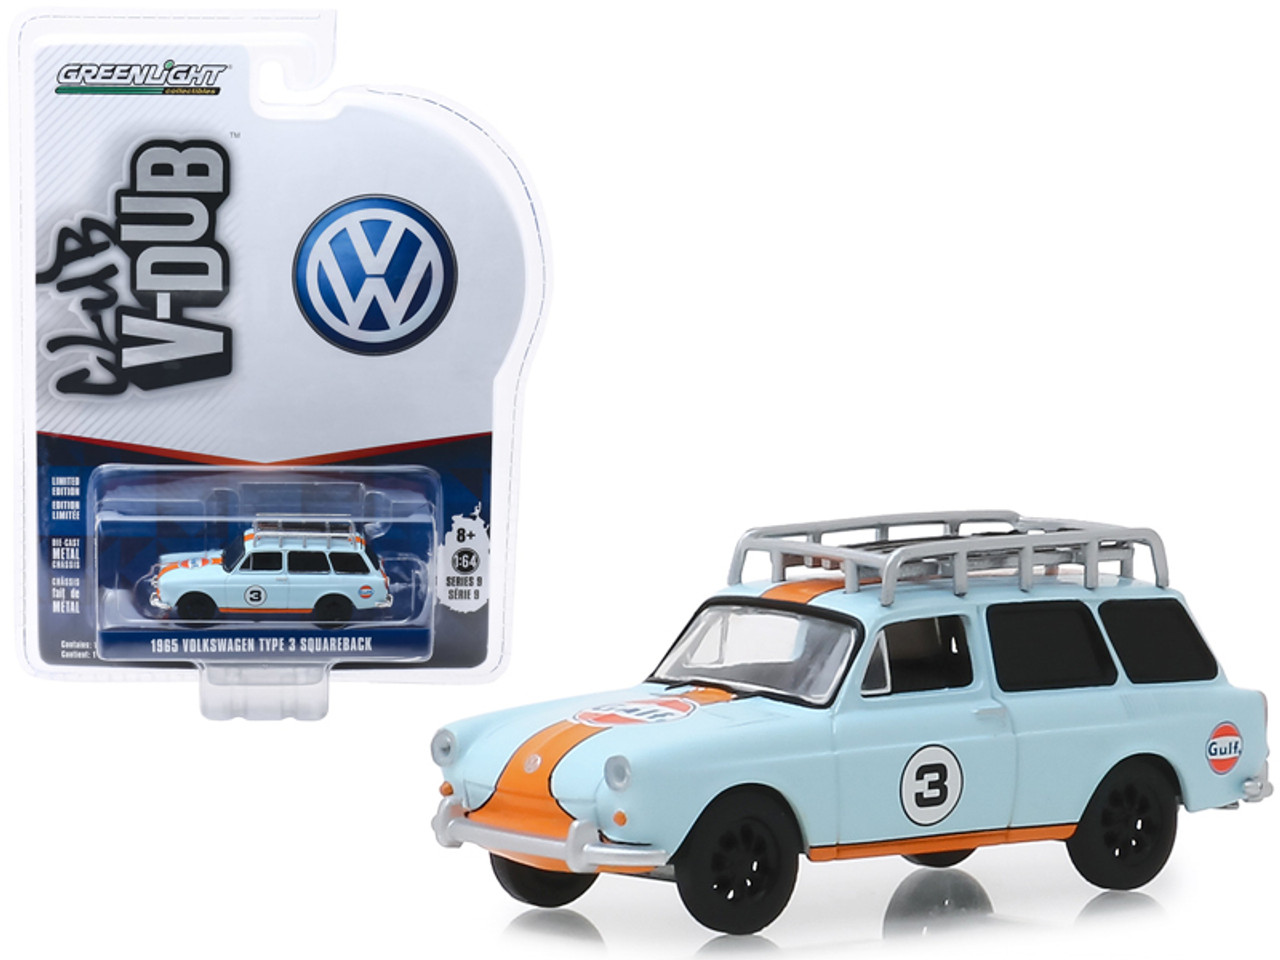 1965 Volkswagen Type 3 Squareback #3 "Gulf Oil" with Roof Rack "Club Vee V-Dub" Series 9 1/64 Diecast Model Car by Greenlight